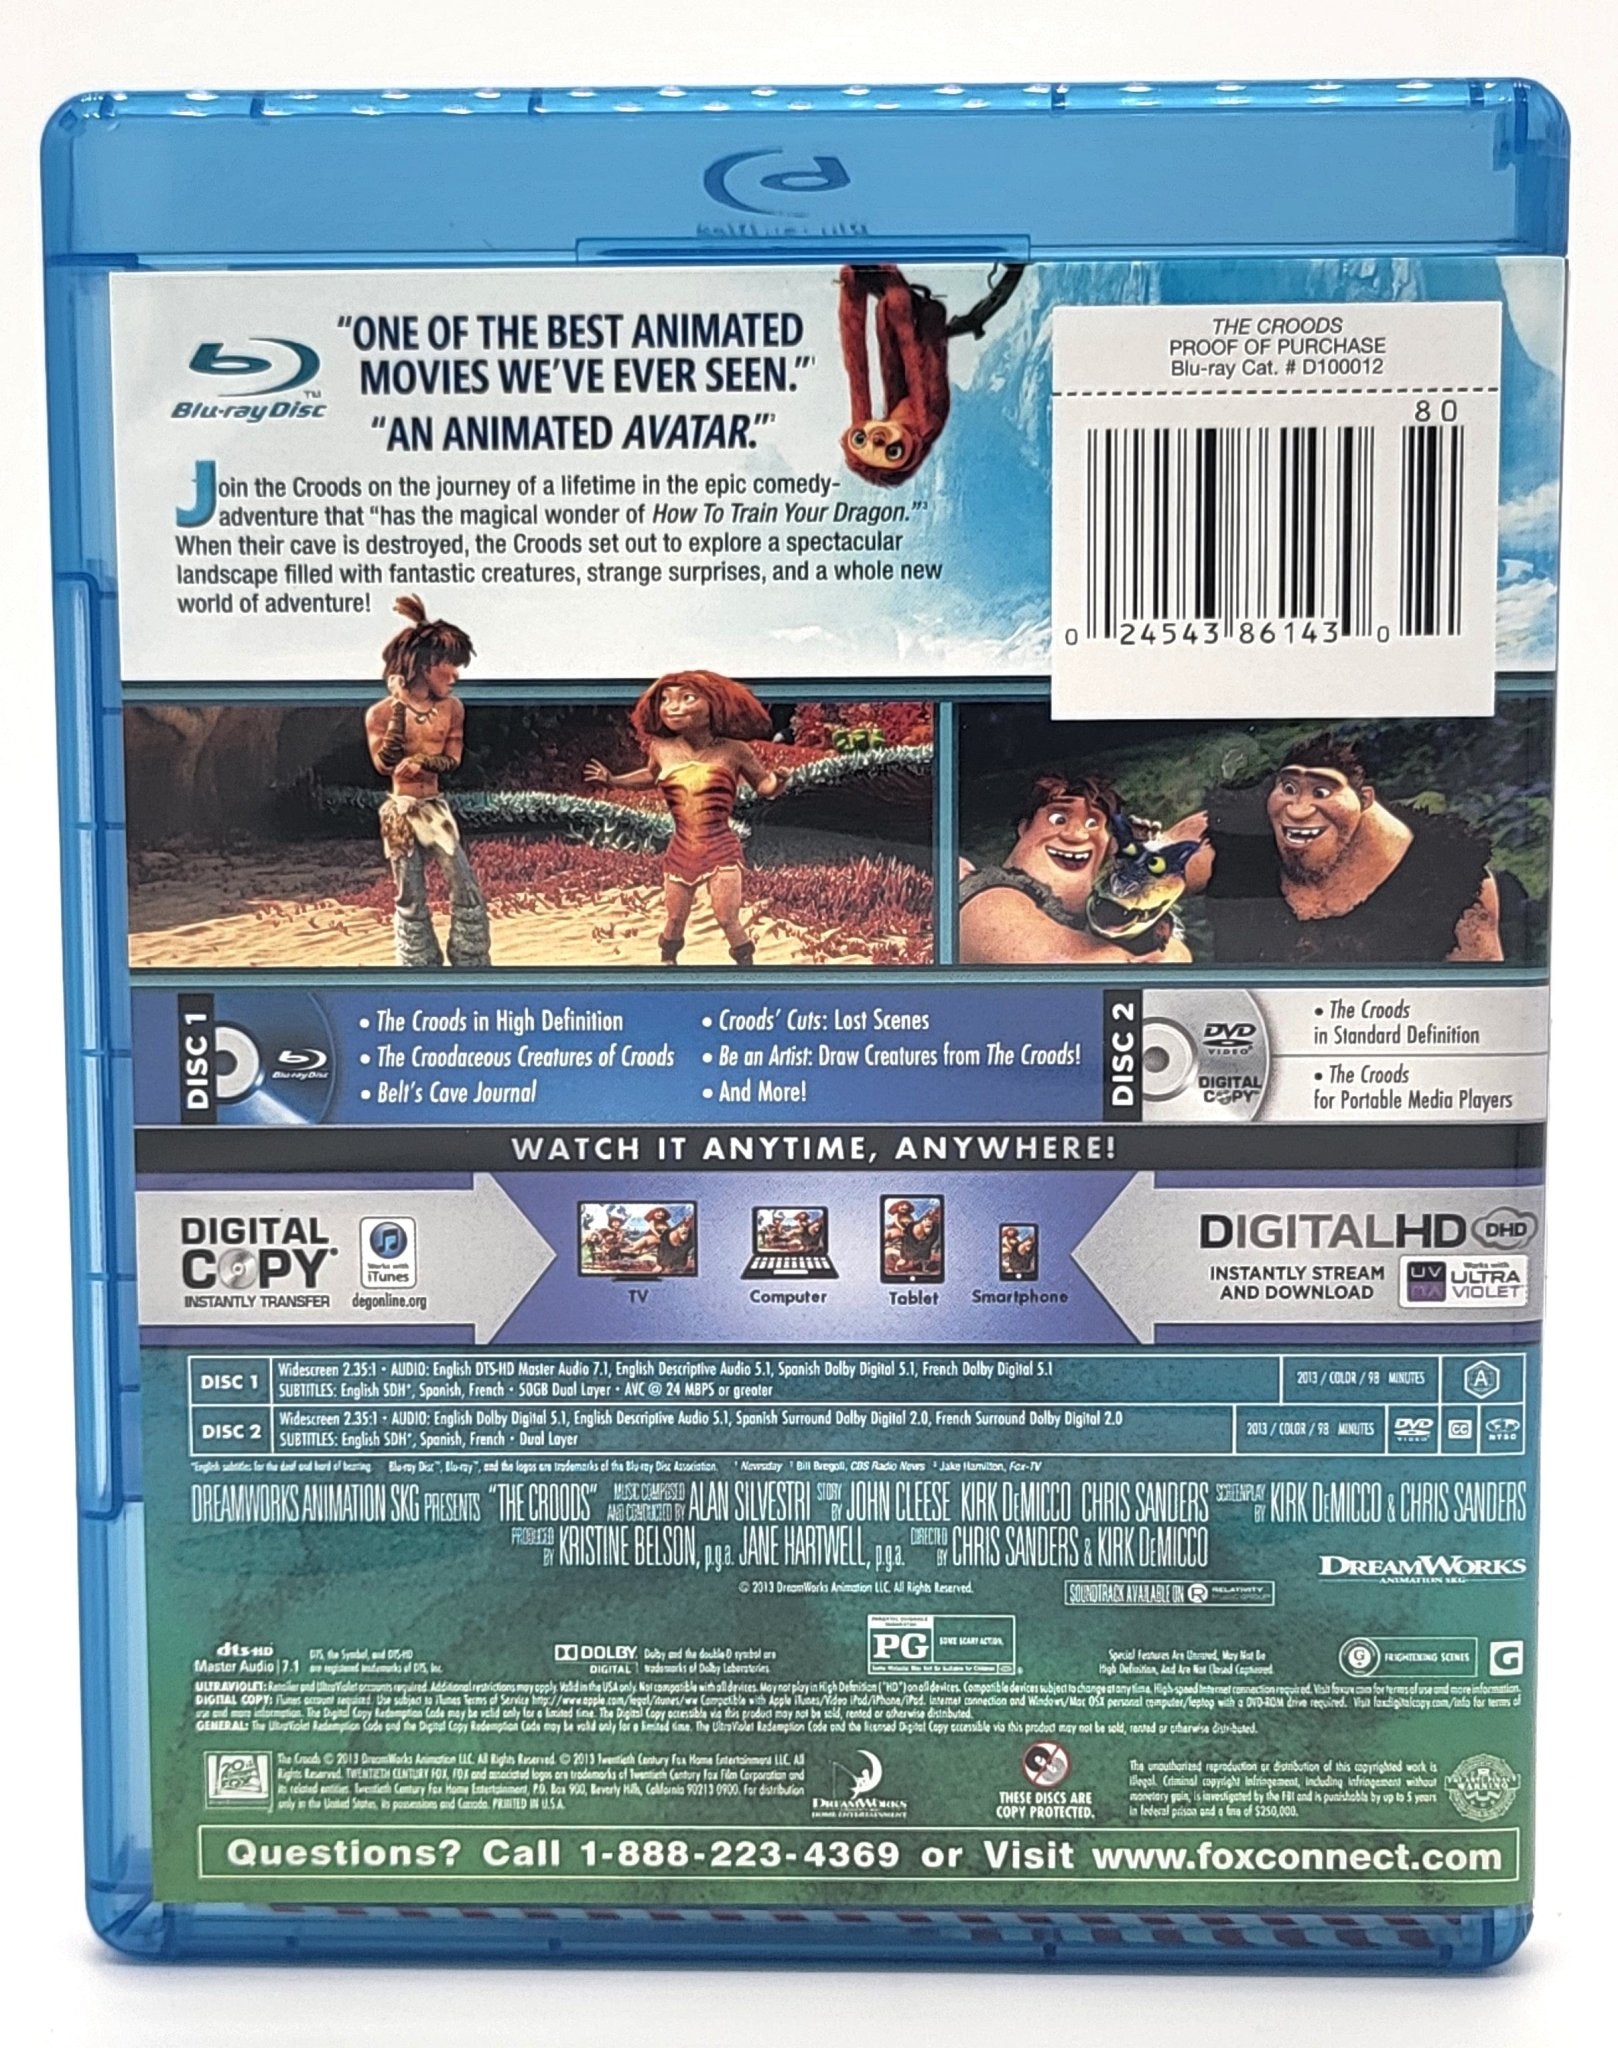 Universal Pictures Home Entertainment - The Croods | Blu ray & DVD | Widescreen - DVD & Blu-ray - Steady Bunny Shop